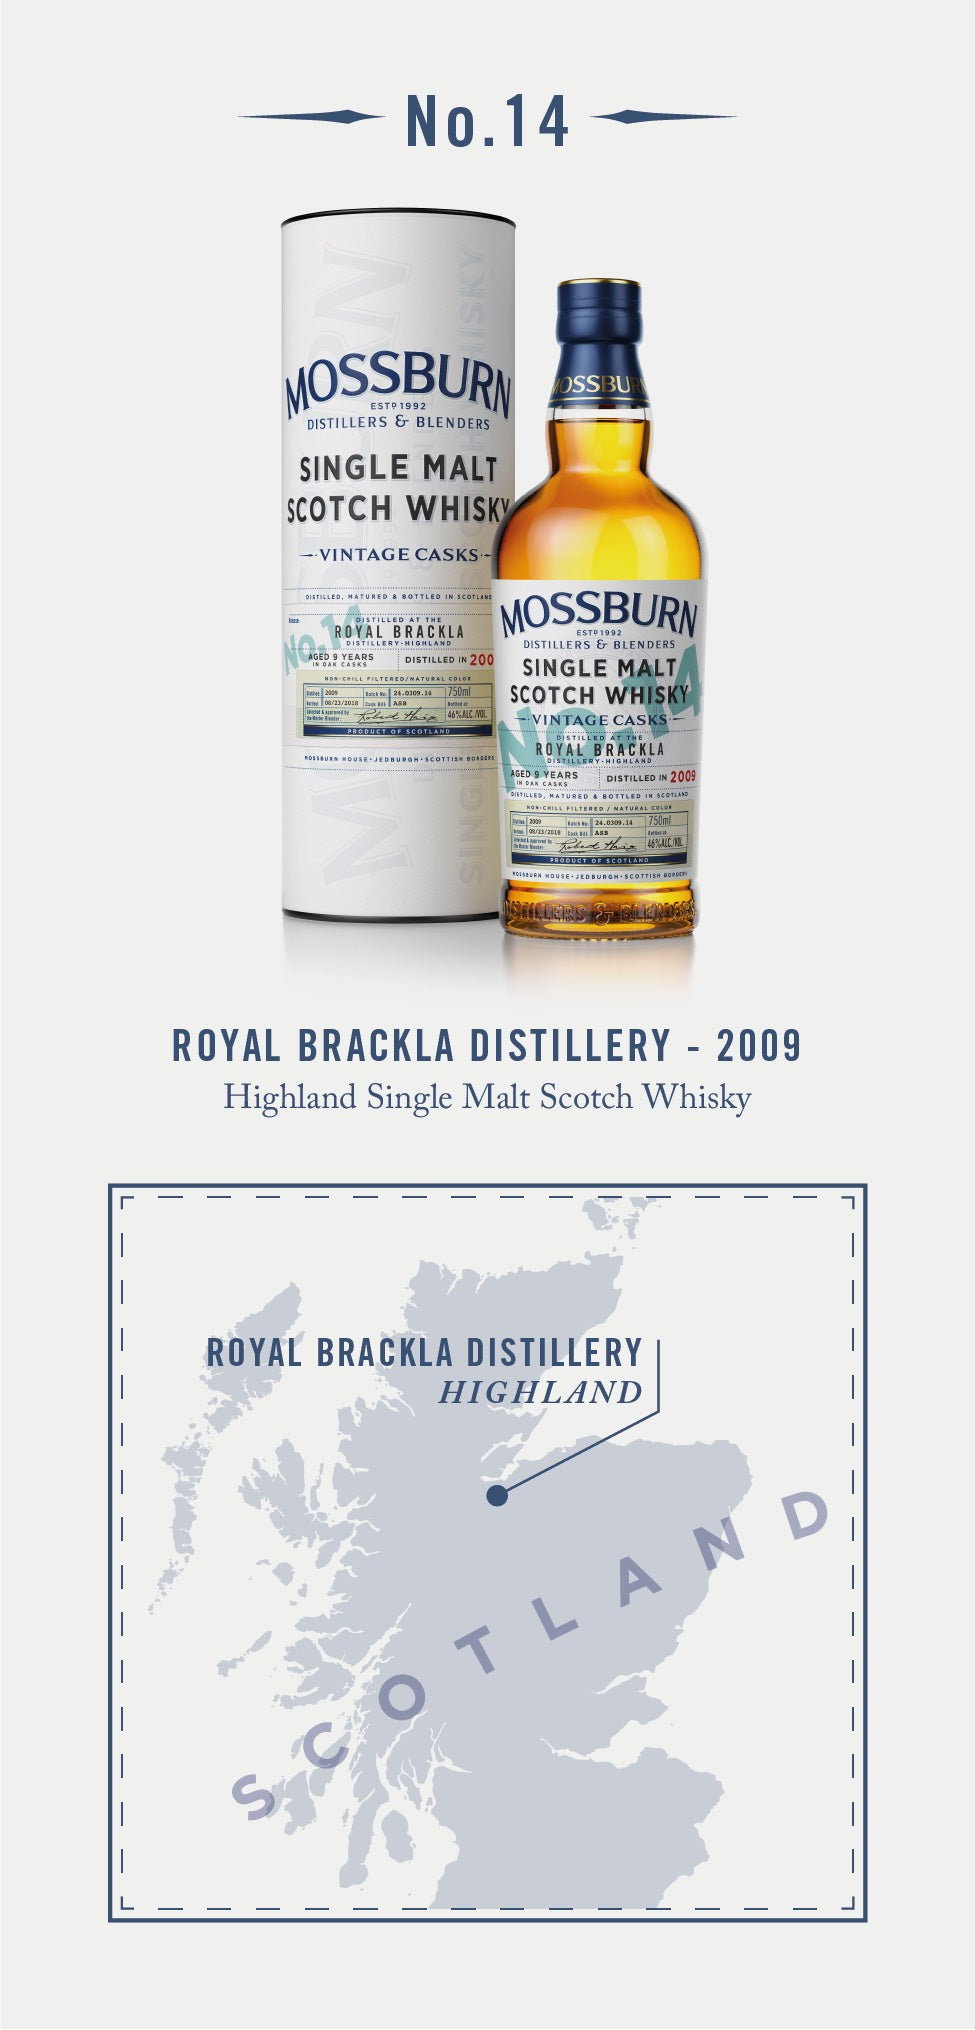 Royal Brackla 9 Years Old No. 14 Scotch Whisky  by Mossburn Distillers